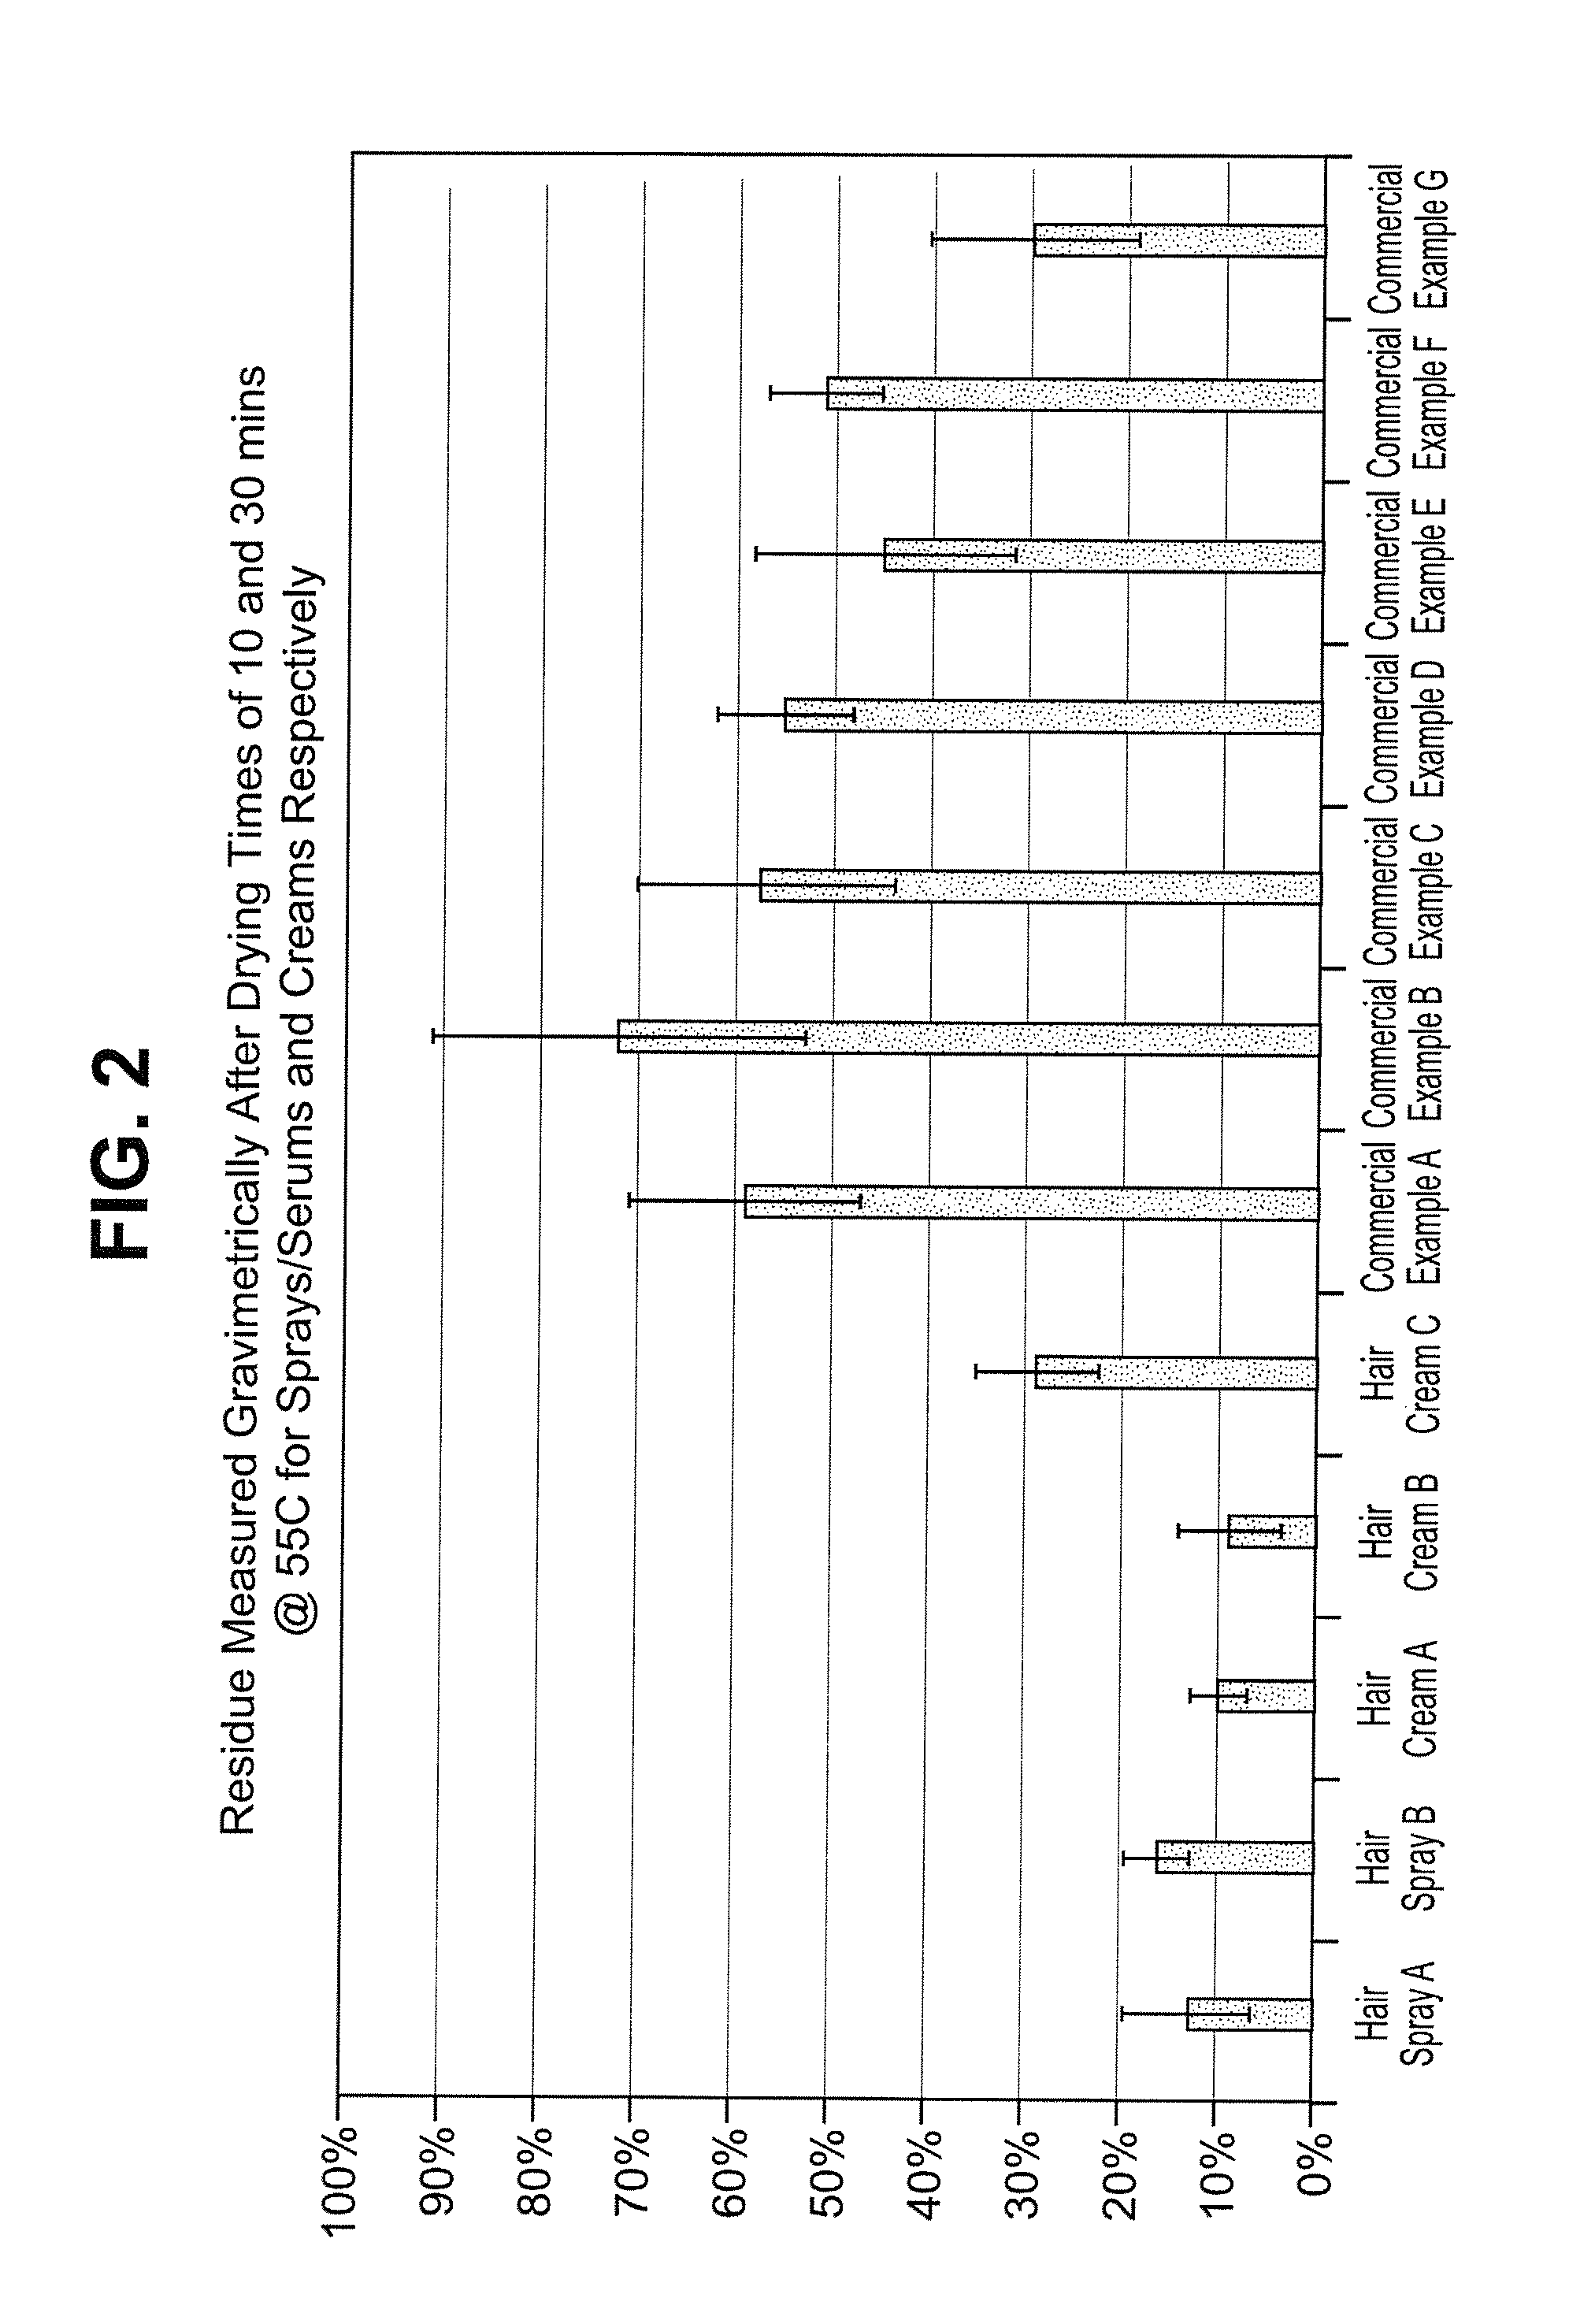 Hair care compositions and methods of treating hair